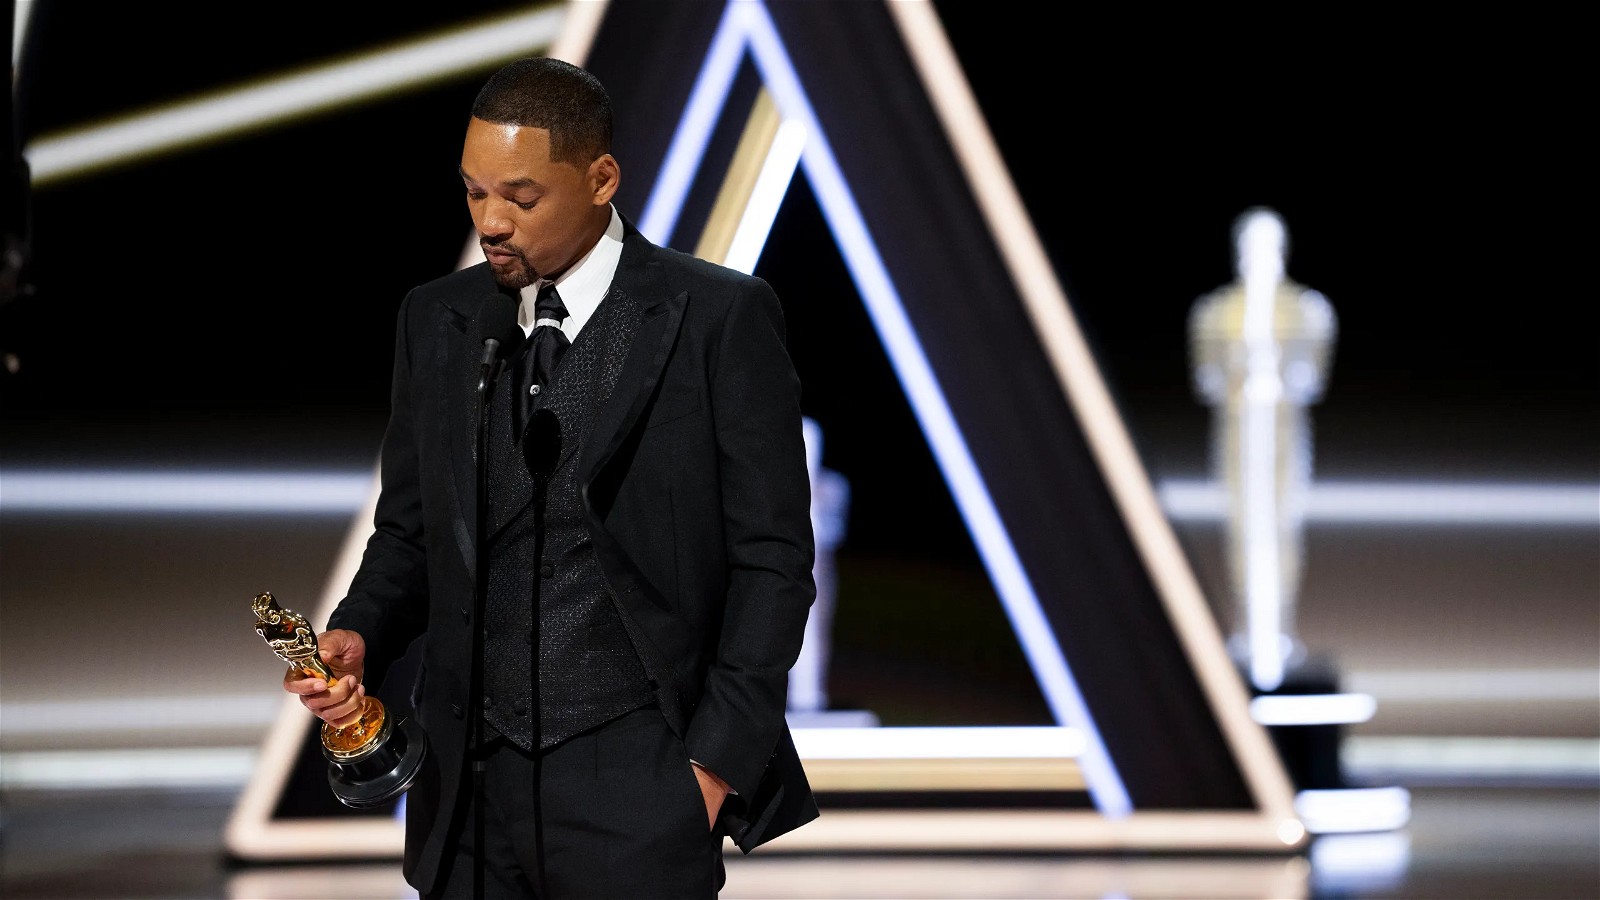 Will Smith wins Best Actor for King Richard